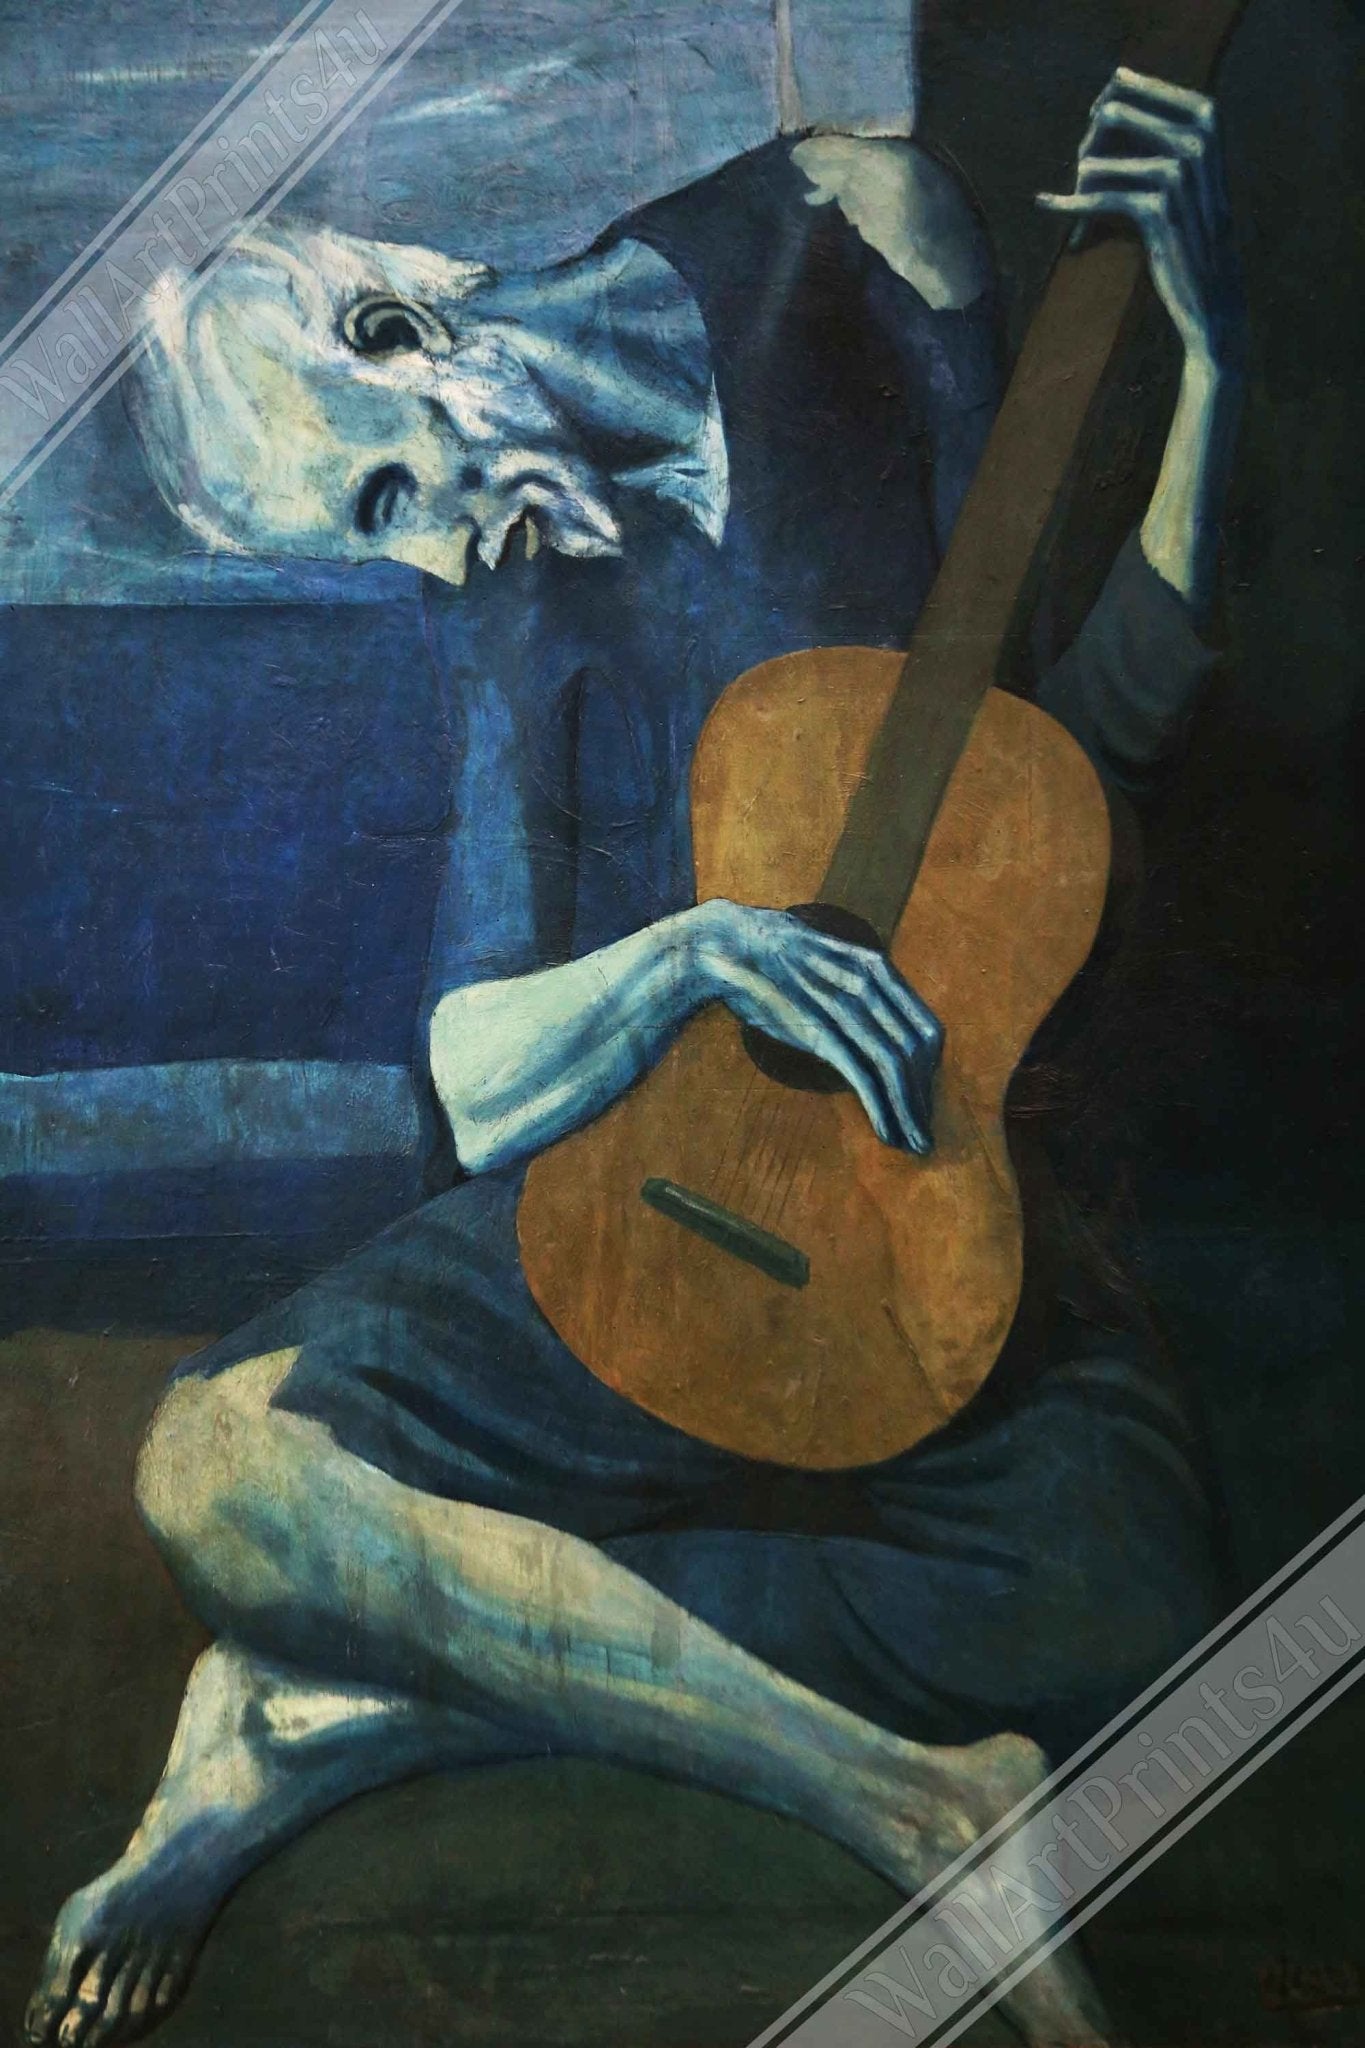 Picasso Poster, The Old Guitarist - Picasso Print, Pablo Picasso 1904 - WallArtPrints4U